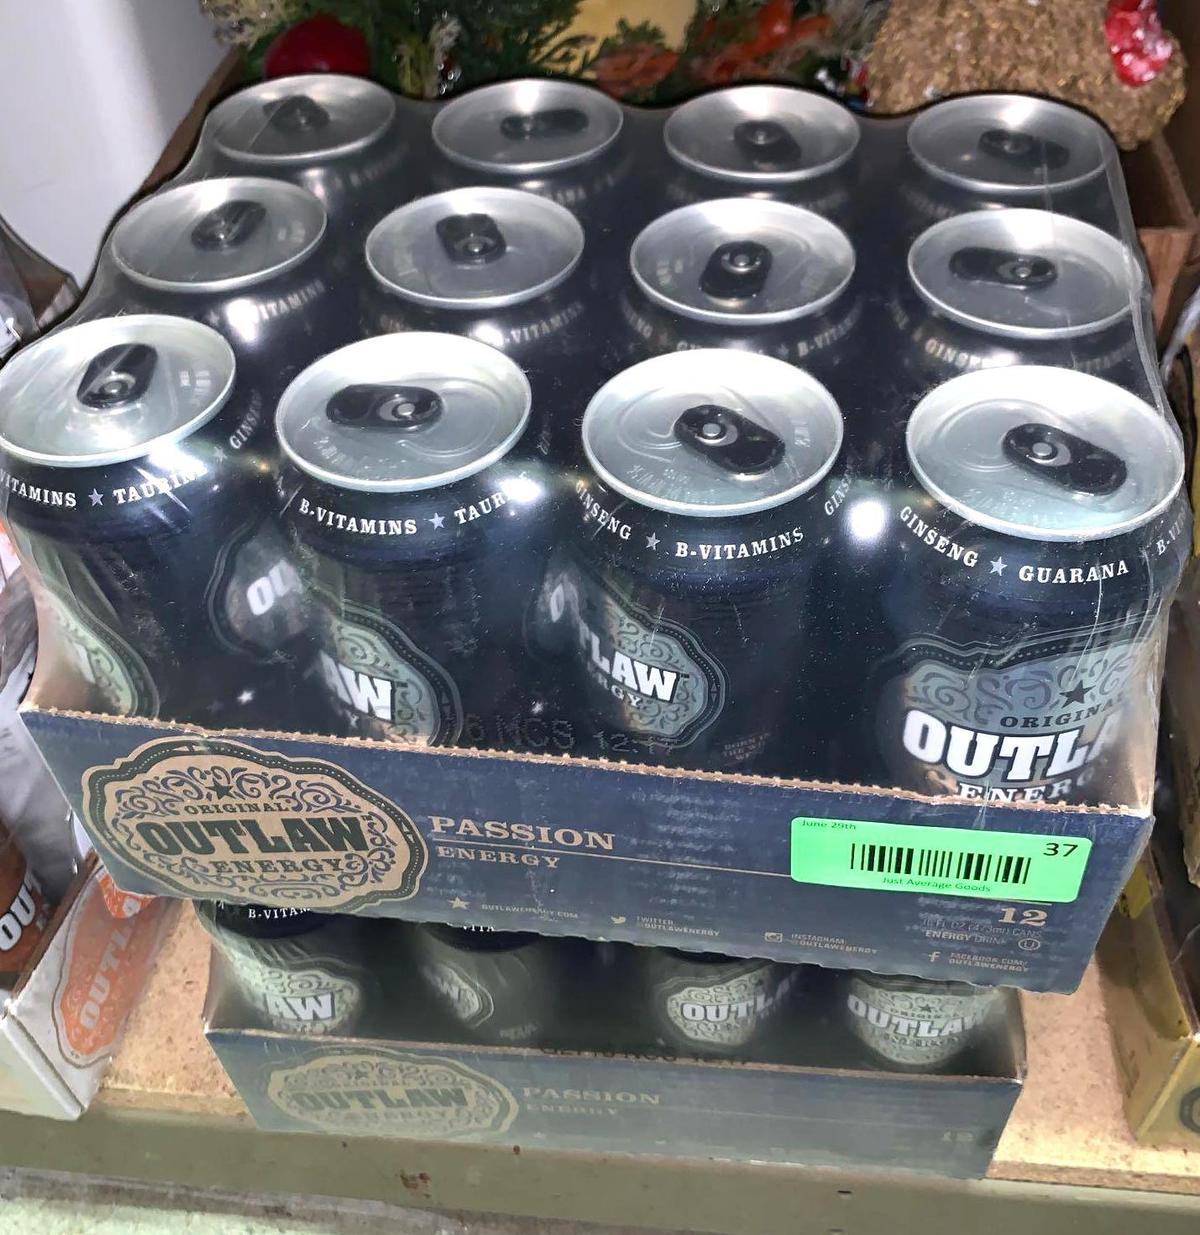 24 Cans of Passion Flavor Outlaw Energy Drinks